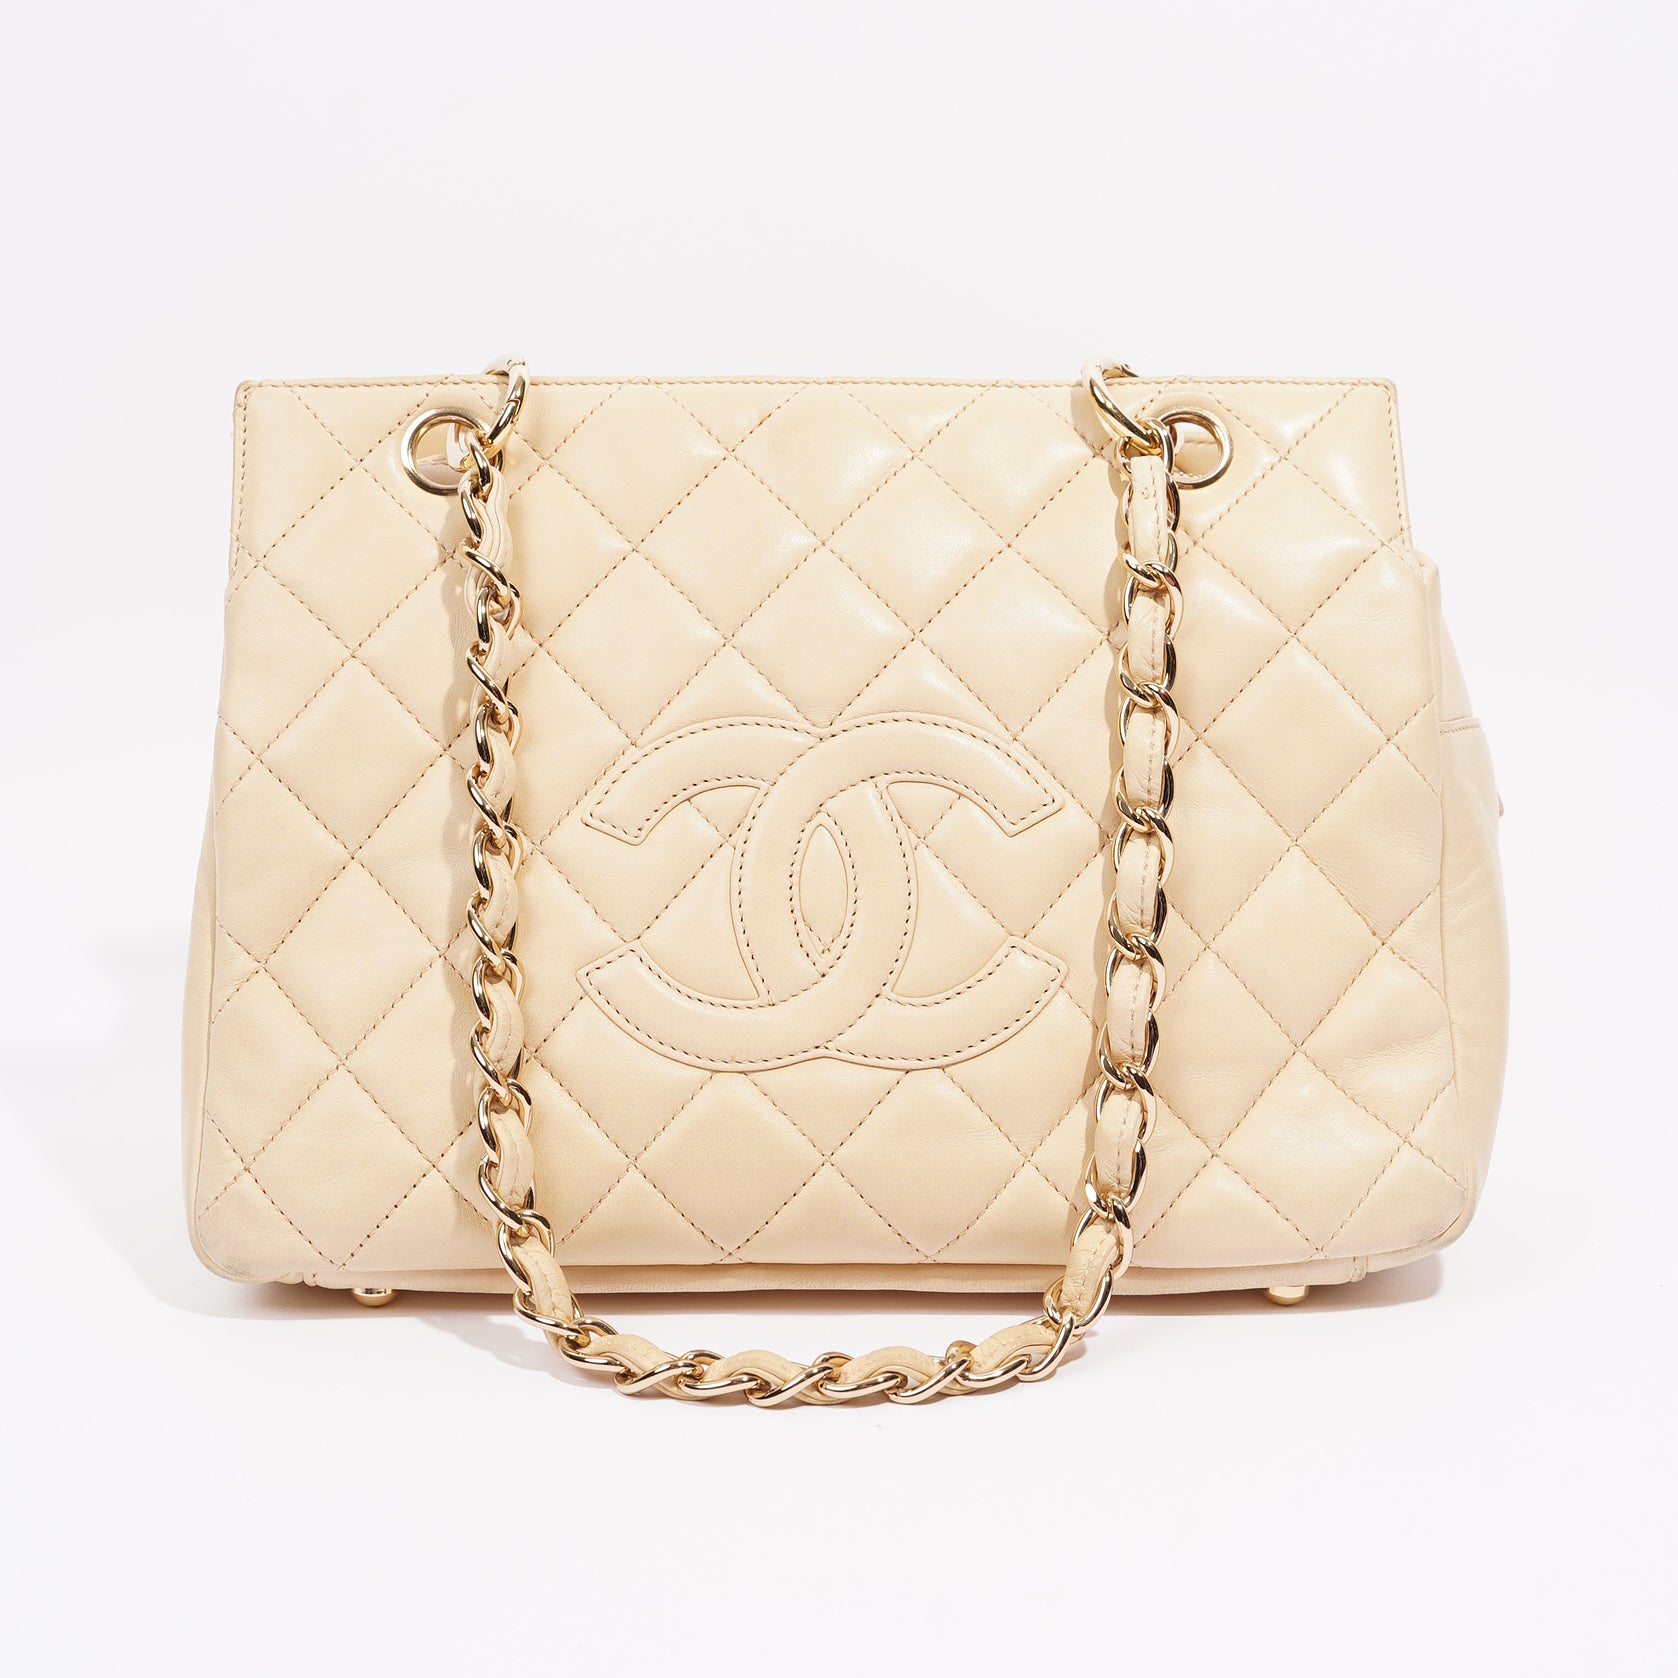 Chanel Womens Vintage Petit Timeless Tote Cream Leather Small